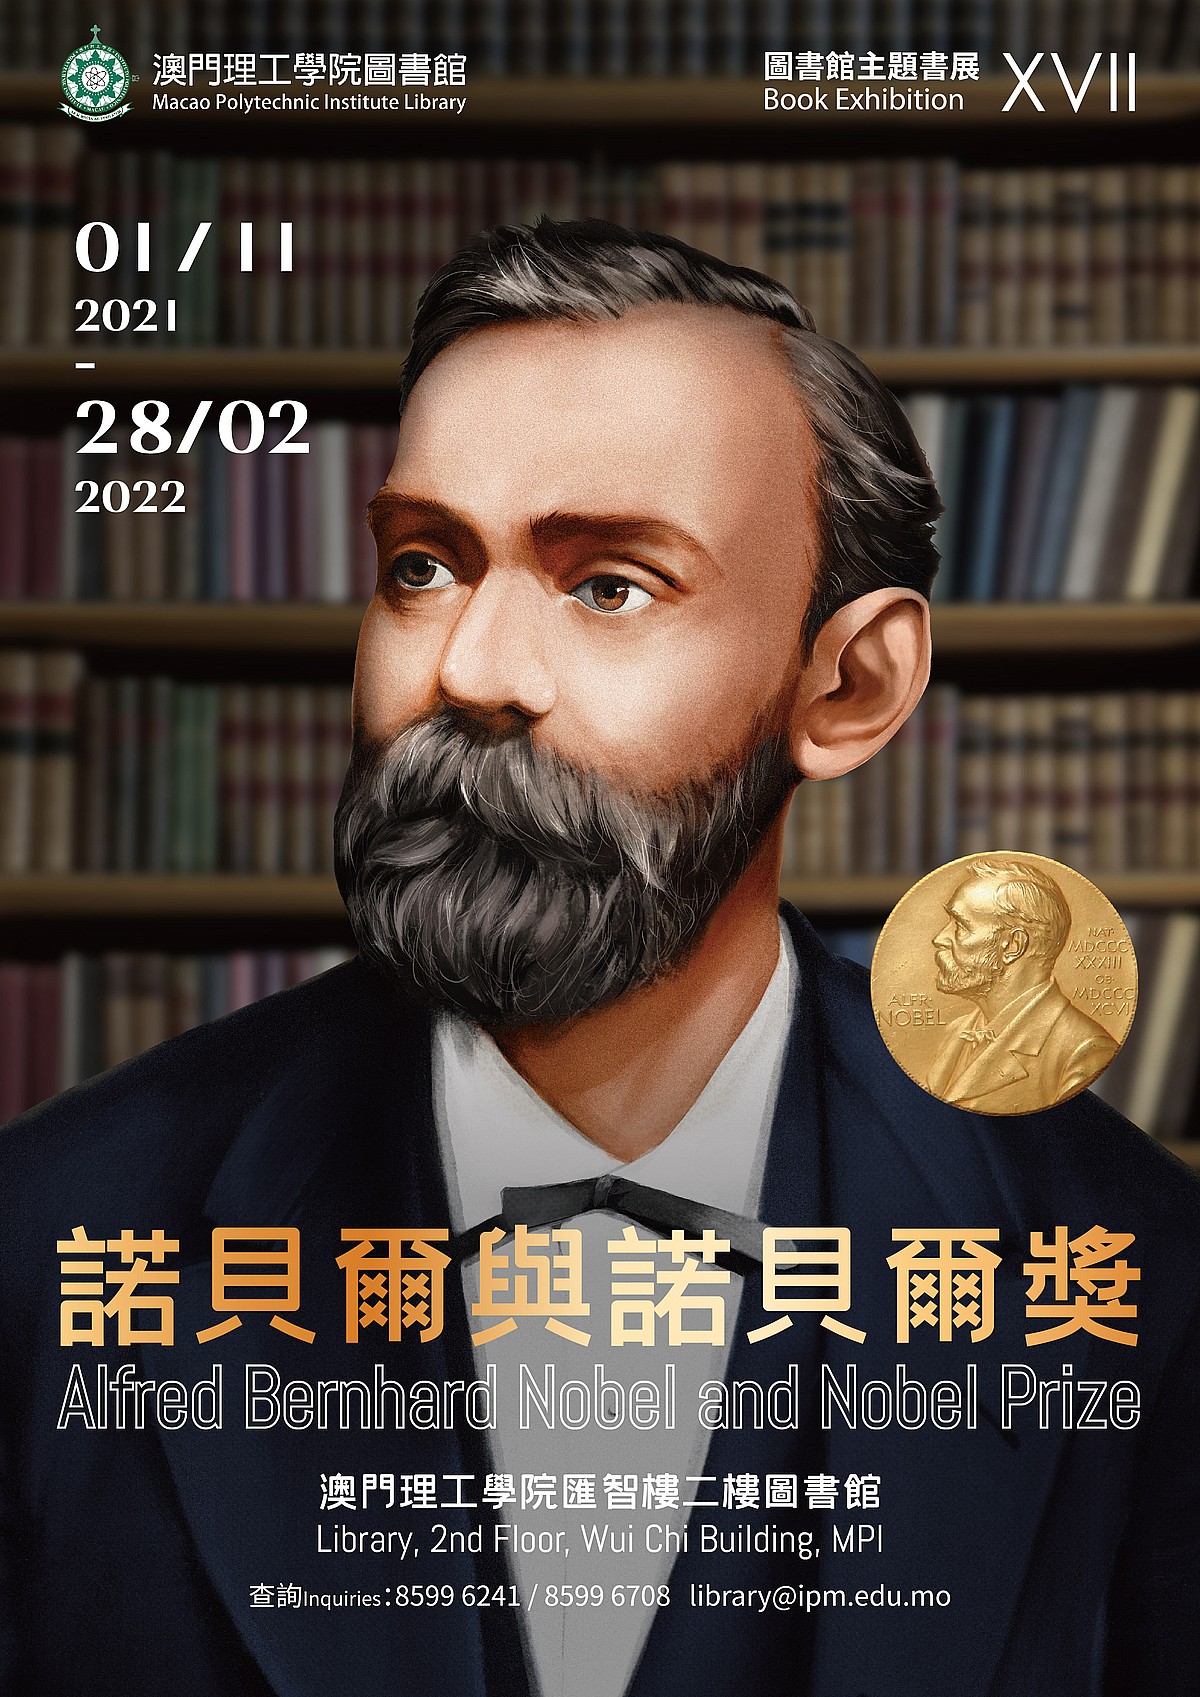 LIBRARY BOOK EXHIBITION 17 - Alfred Bernhard Nobel and Nobel Prize